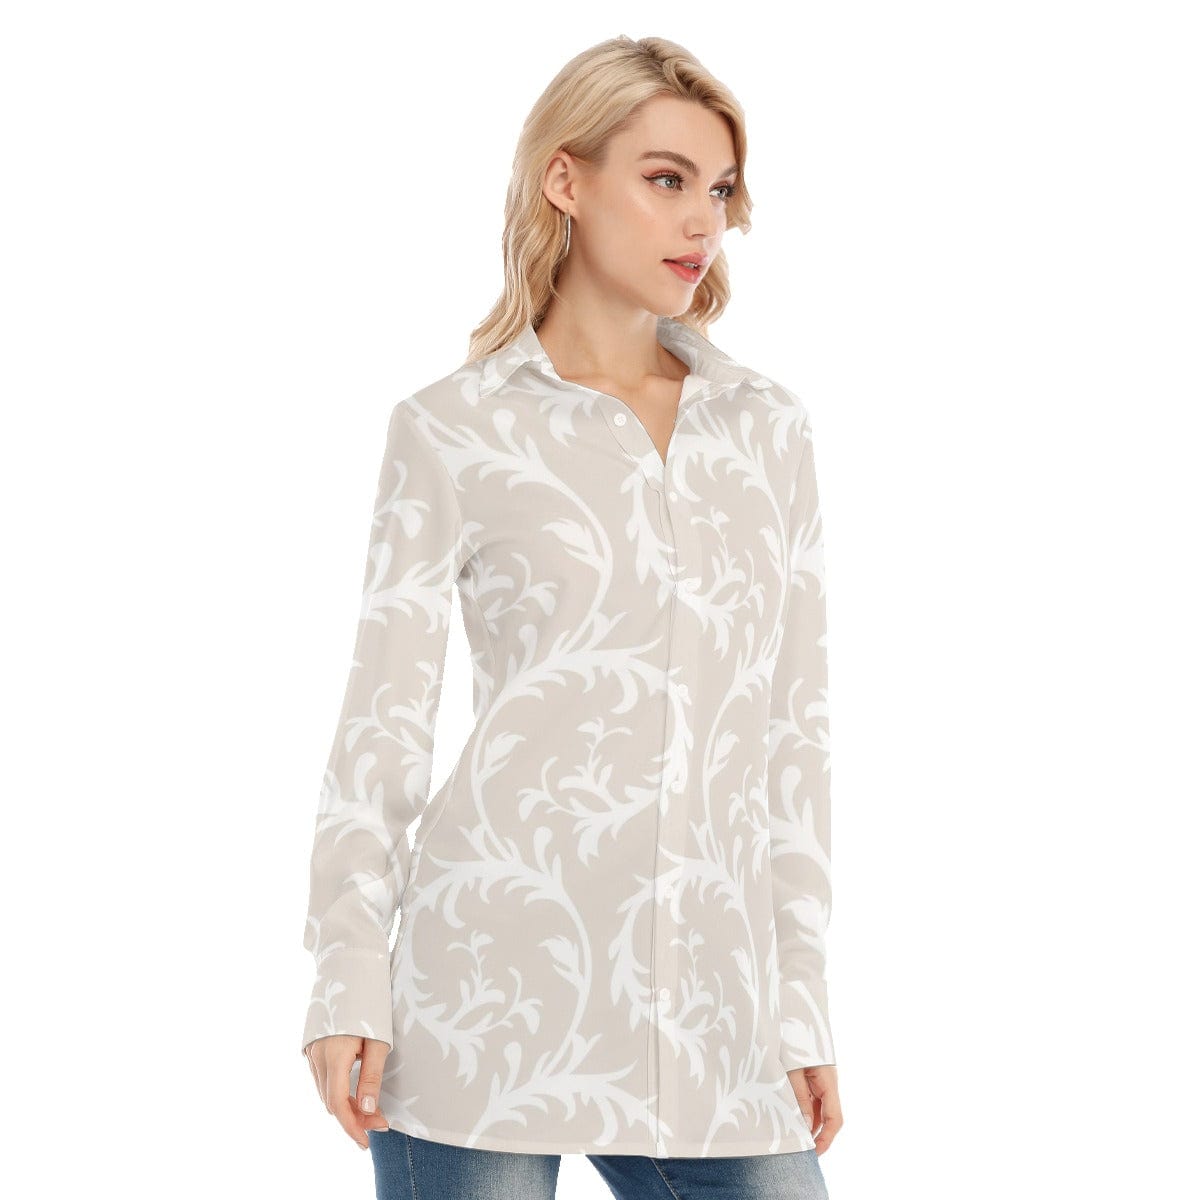 3R9FF All-Over Print Women's Long Shirt |115GSM 98% Cotton and 2% spandex